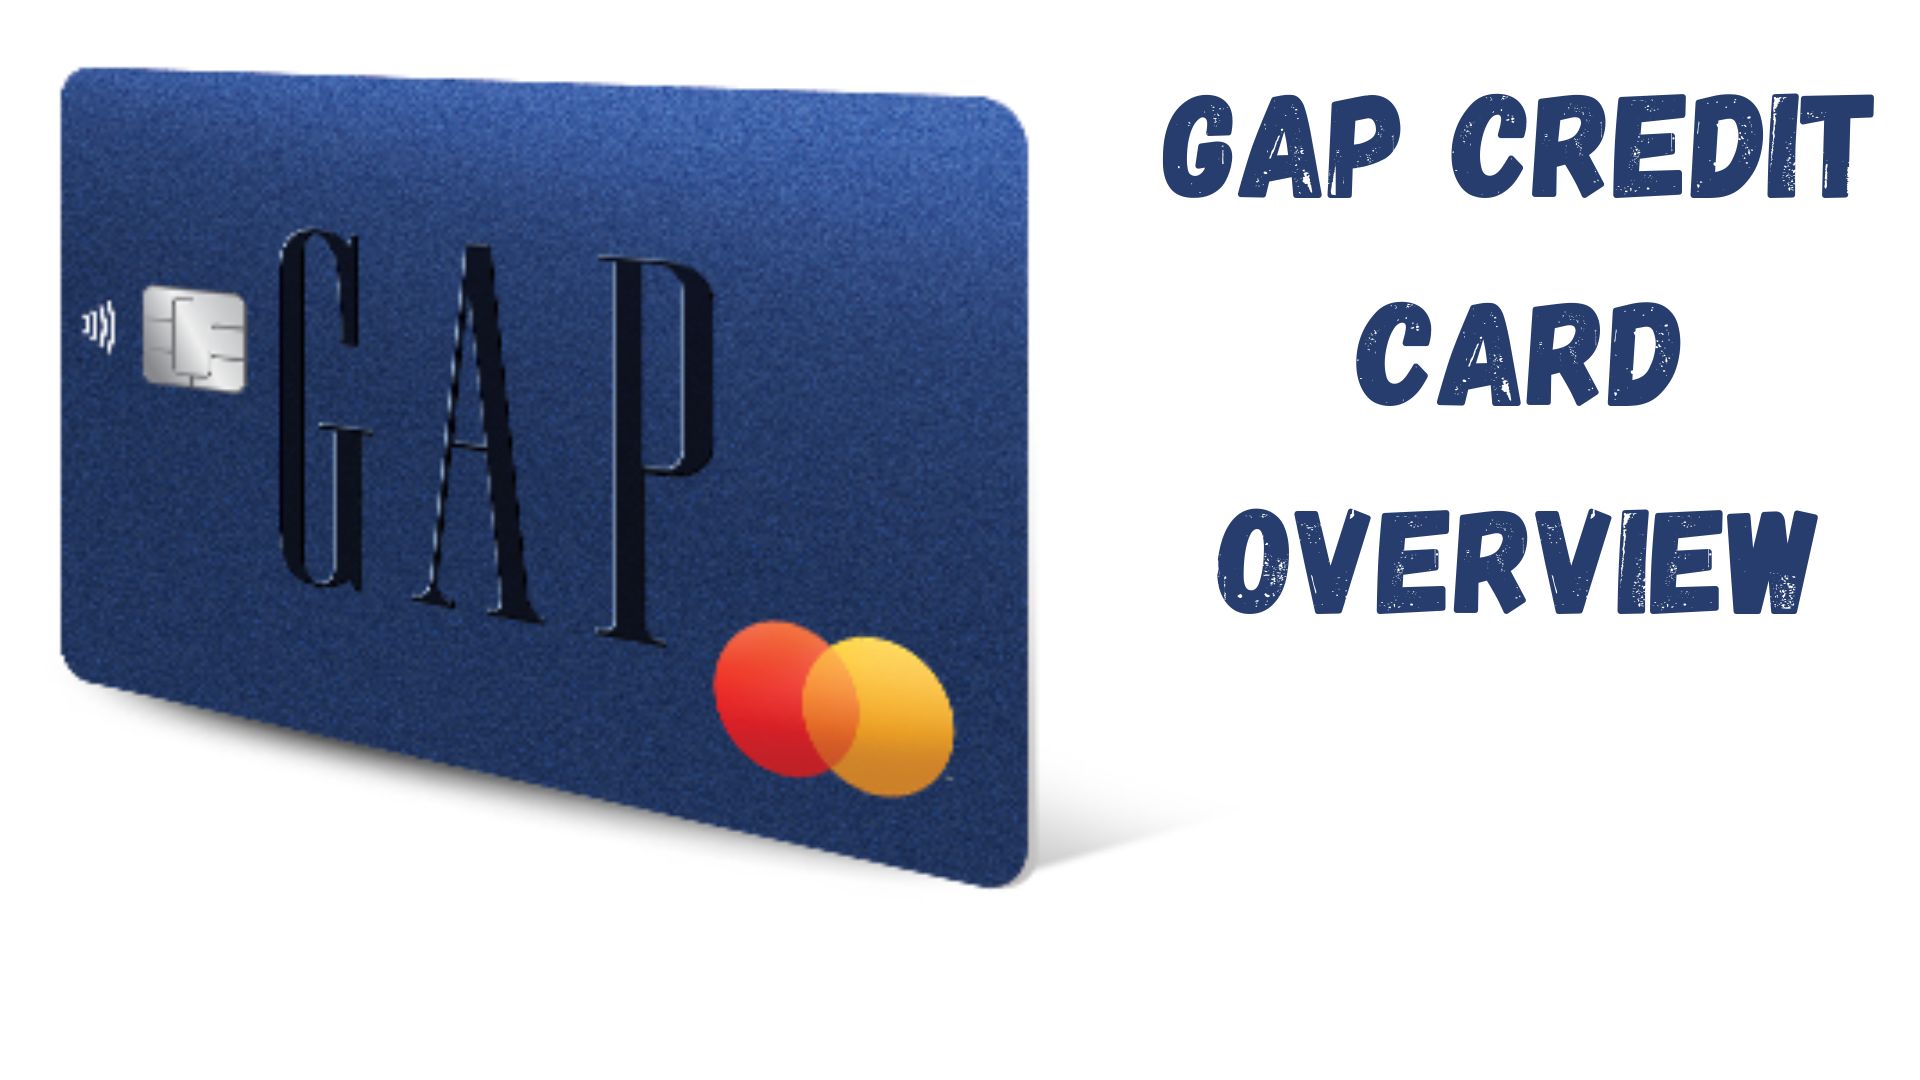 Gap Credit Card Overview